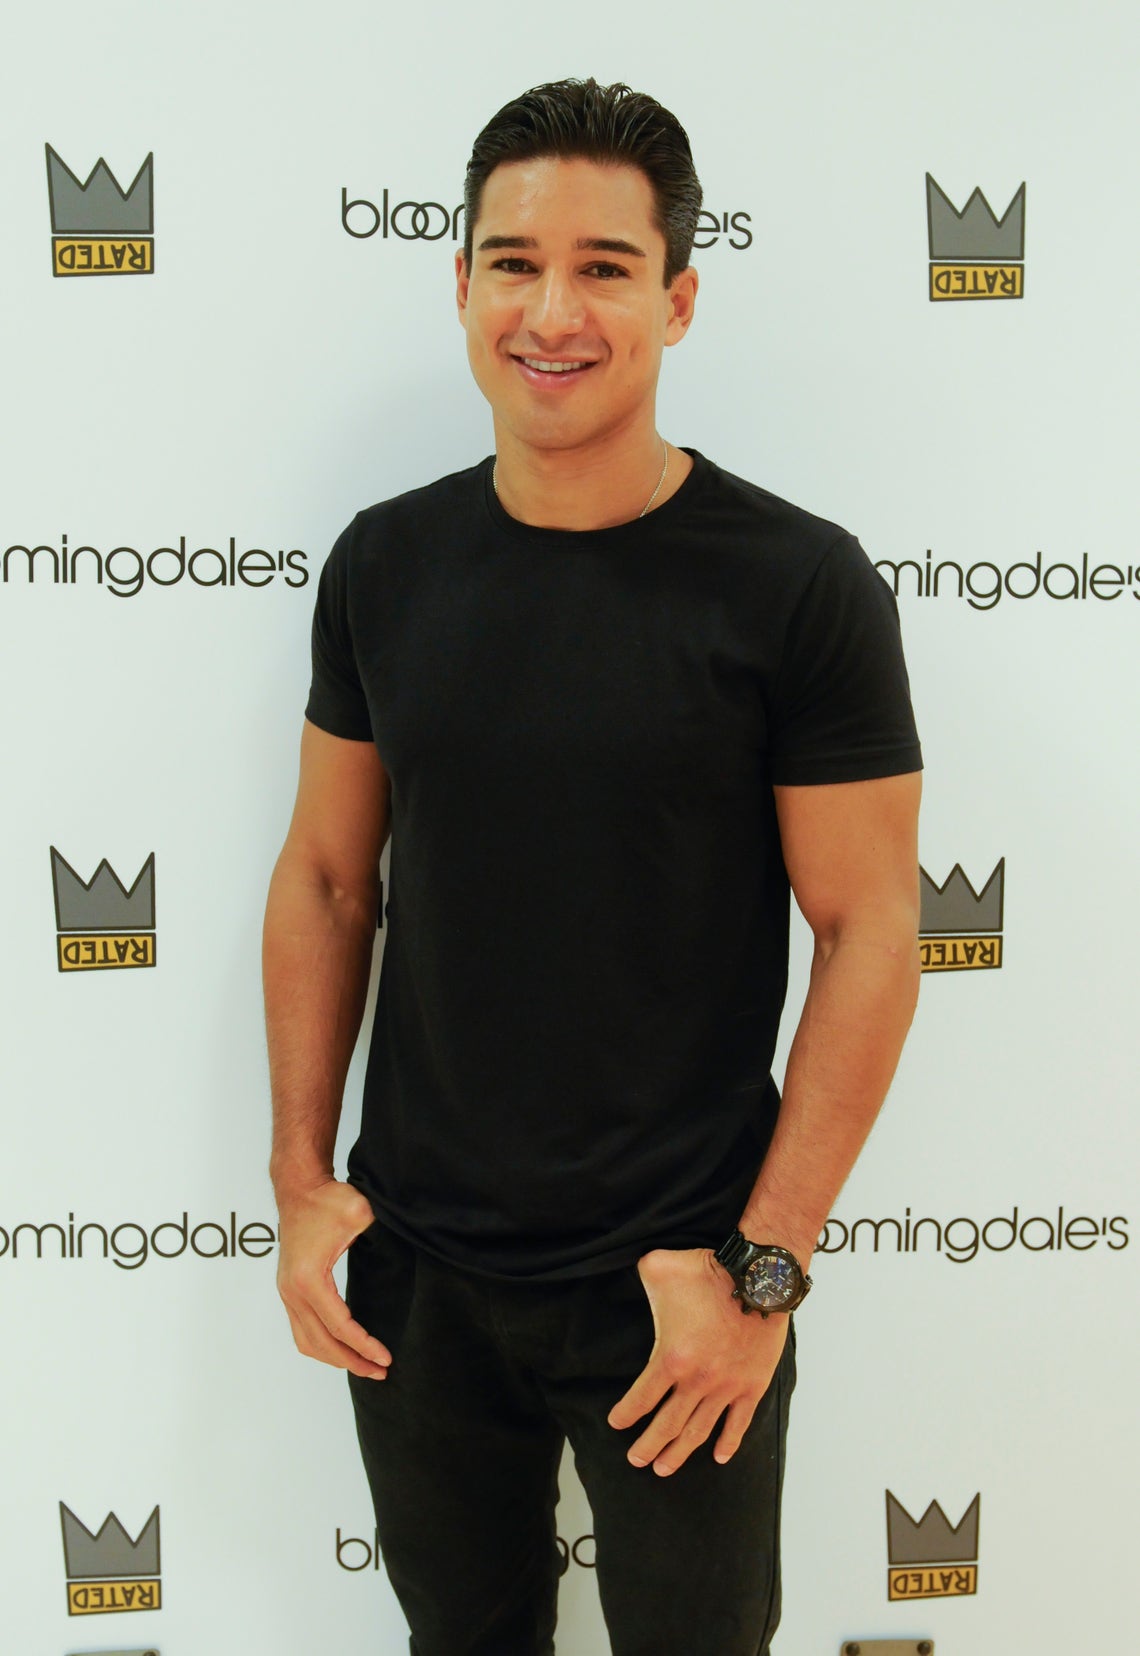 Mario Lopez Shows Off His New Underwear LineBy Stripping On